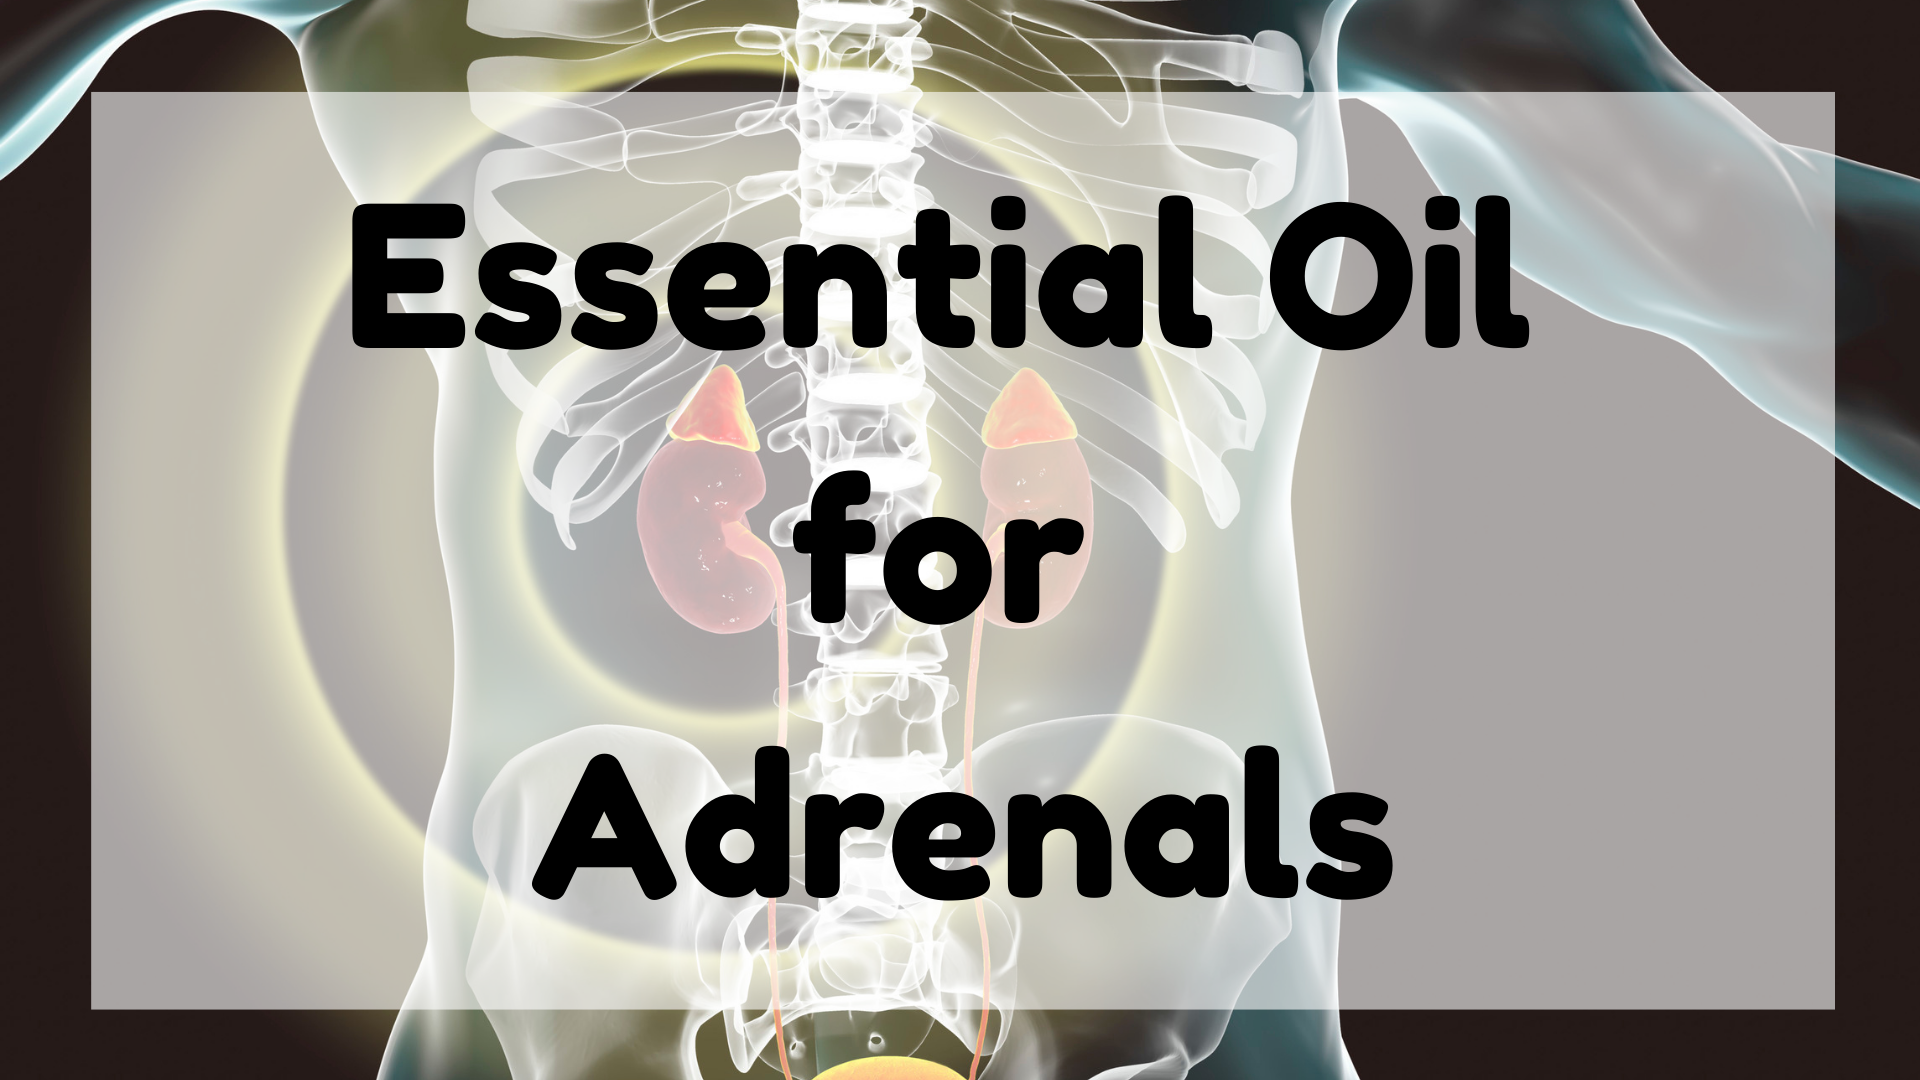 Essential Oil for Adrenals featured image